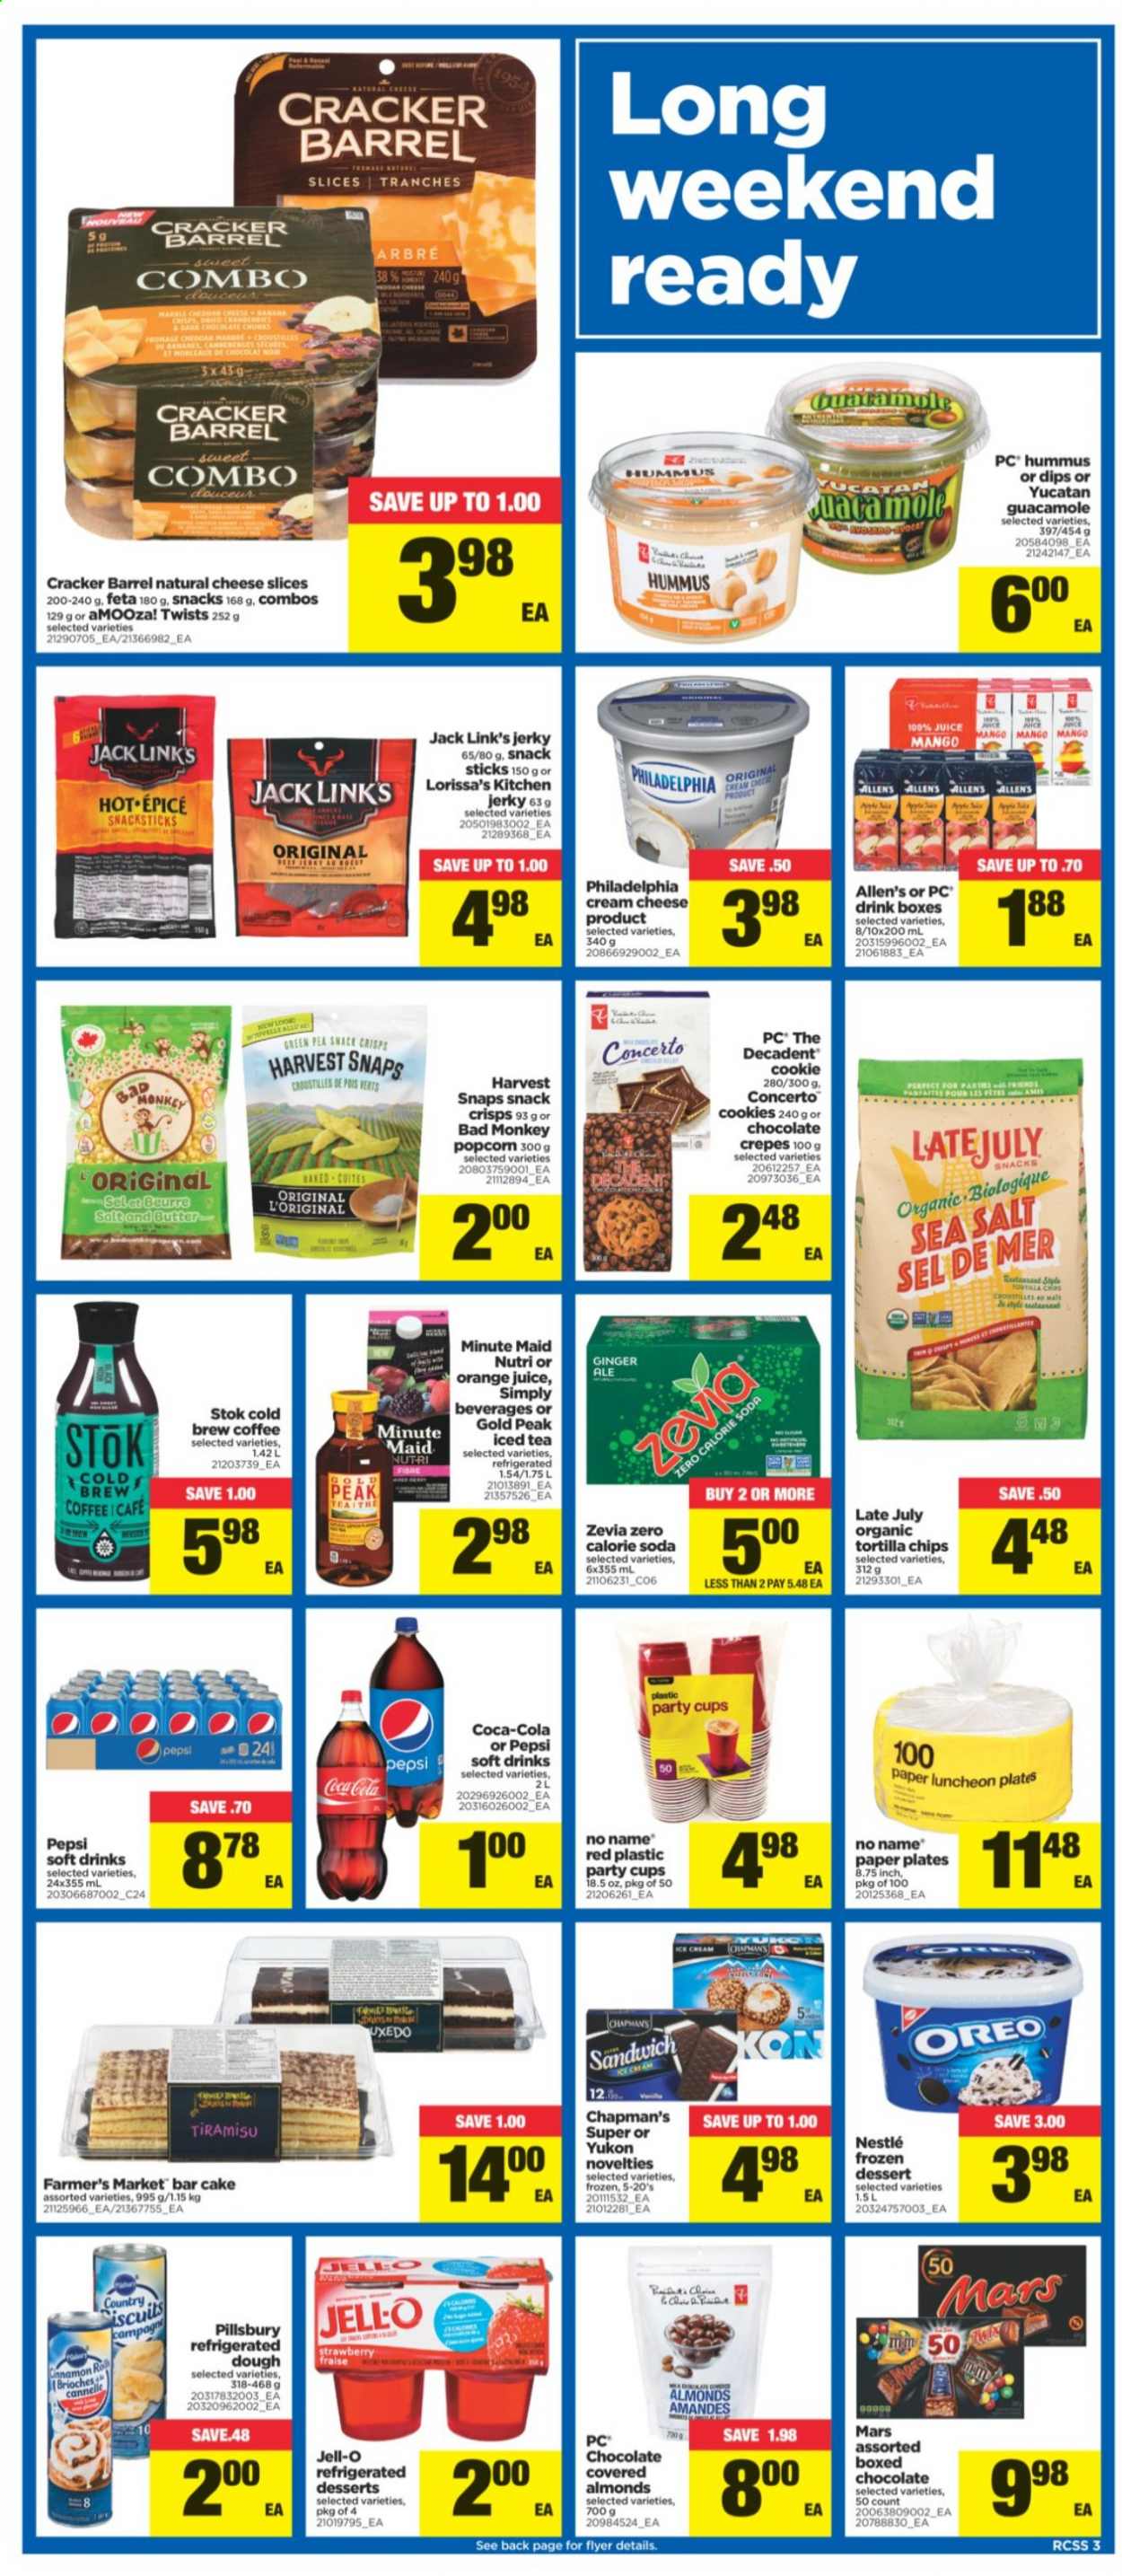 thumbnail - Real Canadian Superstore Flyer - August 26, 2021 - September 01, 2021 - Sales products - Apple, cake, tiramisu, No Name, sandwich, Pillsbury, jerky, hummus, guacamole, lunch meat, cream cheese, sliced cheese, cheese, feta, butter, ice cream, cookies, snack, Mars, crackers, dark chocolate, tortilla chips, popcorn, Jack Link's, Jell-O, Harvest Snaps, almonds, Coca-Cola, ginger ale, Pepsi, orange juice, juice, ice tea, soft drink, fruit punch, soda, coffee, plate, cup, paper, paper plate, party cups, monkey, Oreo, Nestlé. Page 3.